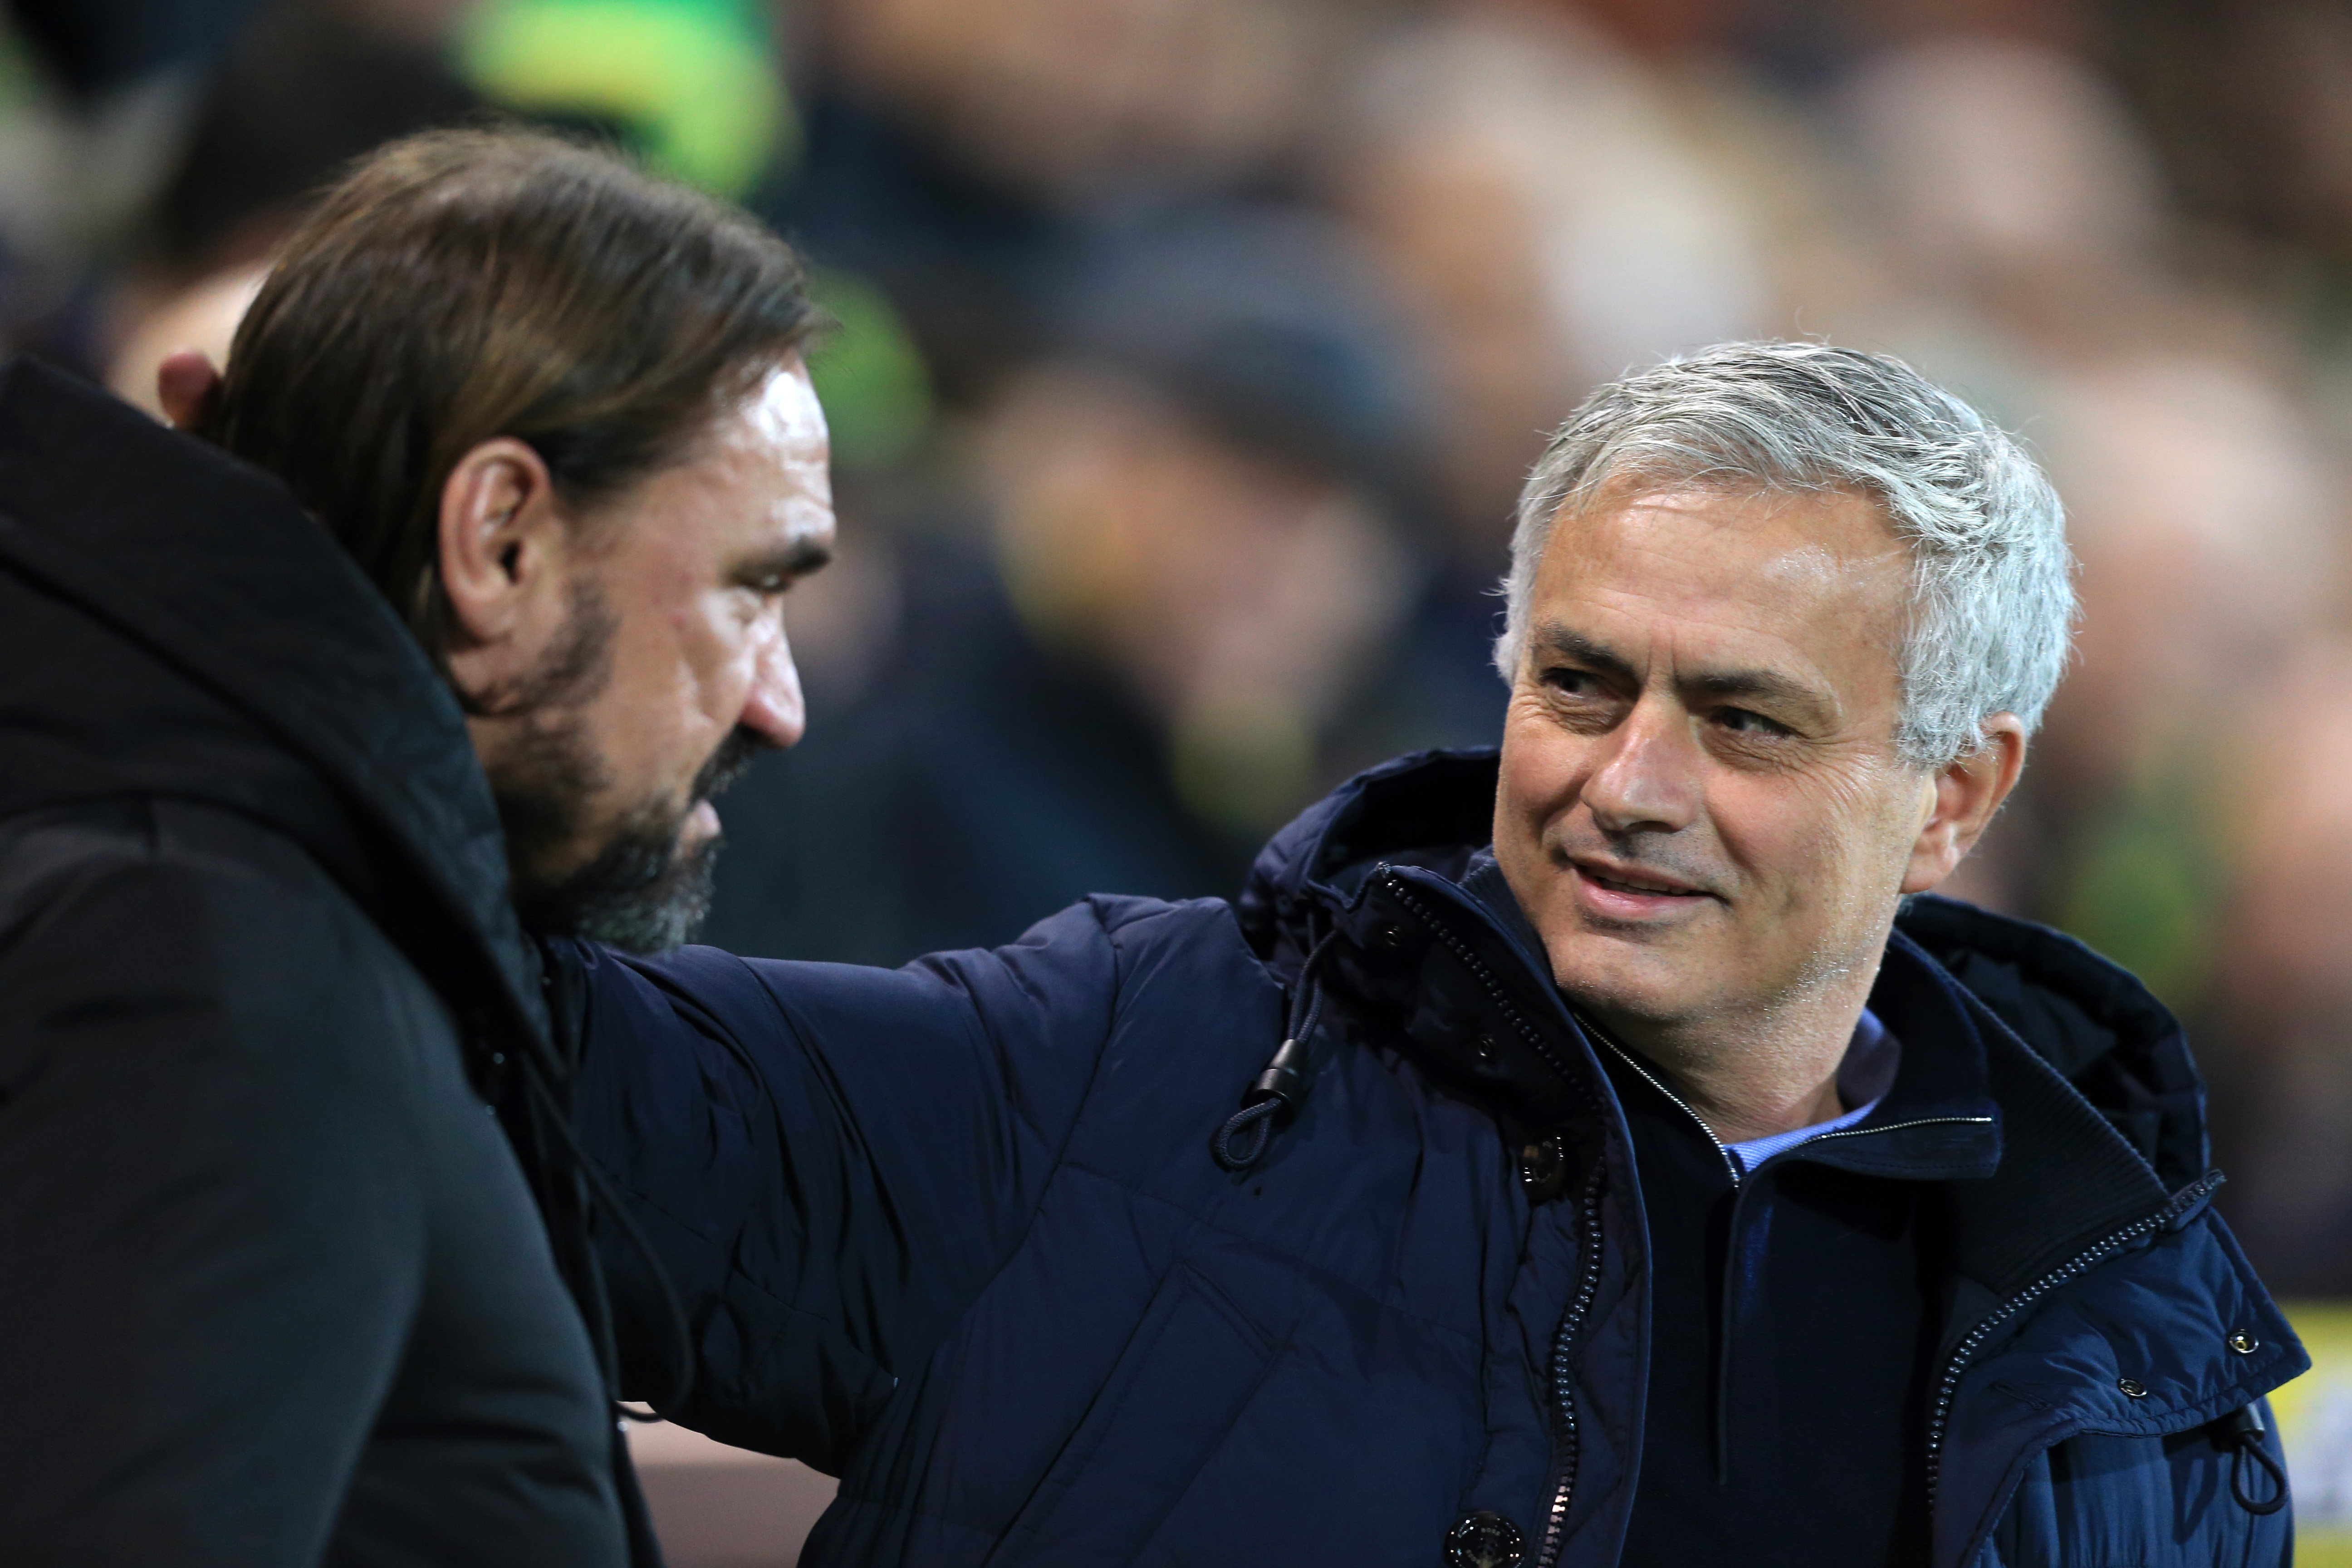 NORWICH, ENGLAND - DECEMBER 28: Jose Mourinho, Manager of Tottenham Hotspur and Daniel Farke, Manager of Norwich City greet each other prior to the Premier League match between Norwich City and Tottenham Hotspur at Carrow Road on December 28, 2019 in Norwich, United Kingdom. (Photo by Stephen Pond/Getty Images)